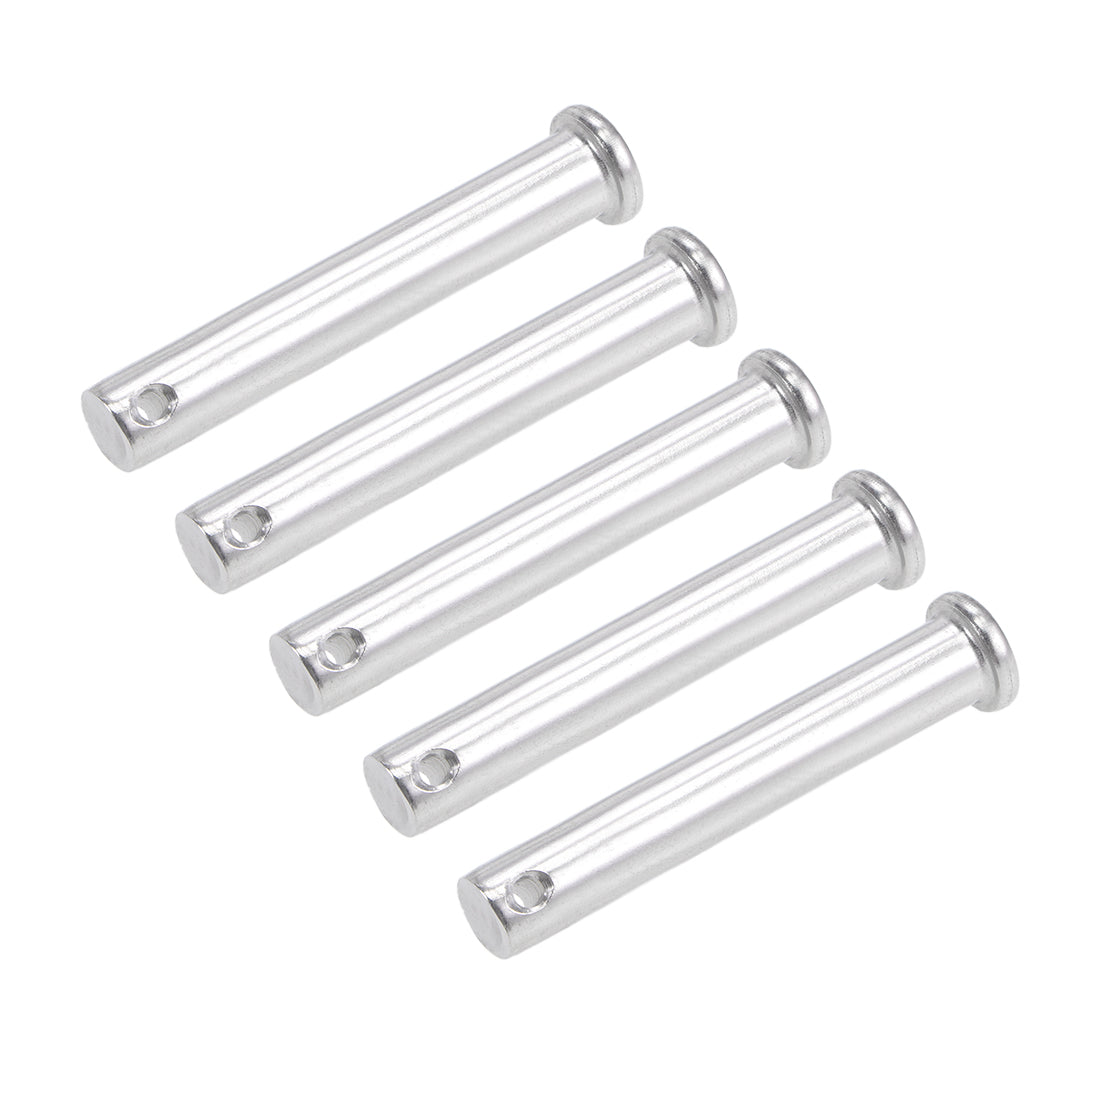 Uxcell Uxcell Single Hole Clevis Pins - 10mm x 50mm Flat Head 304 Stainless Steel Link Hinge Pin 5Pcs